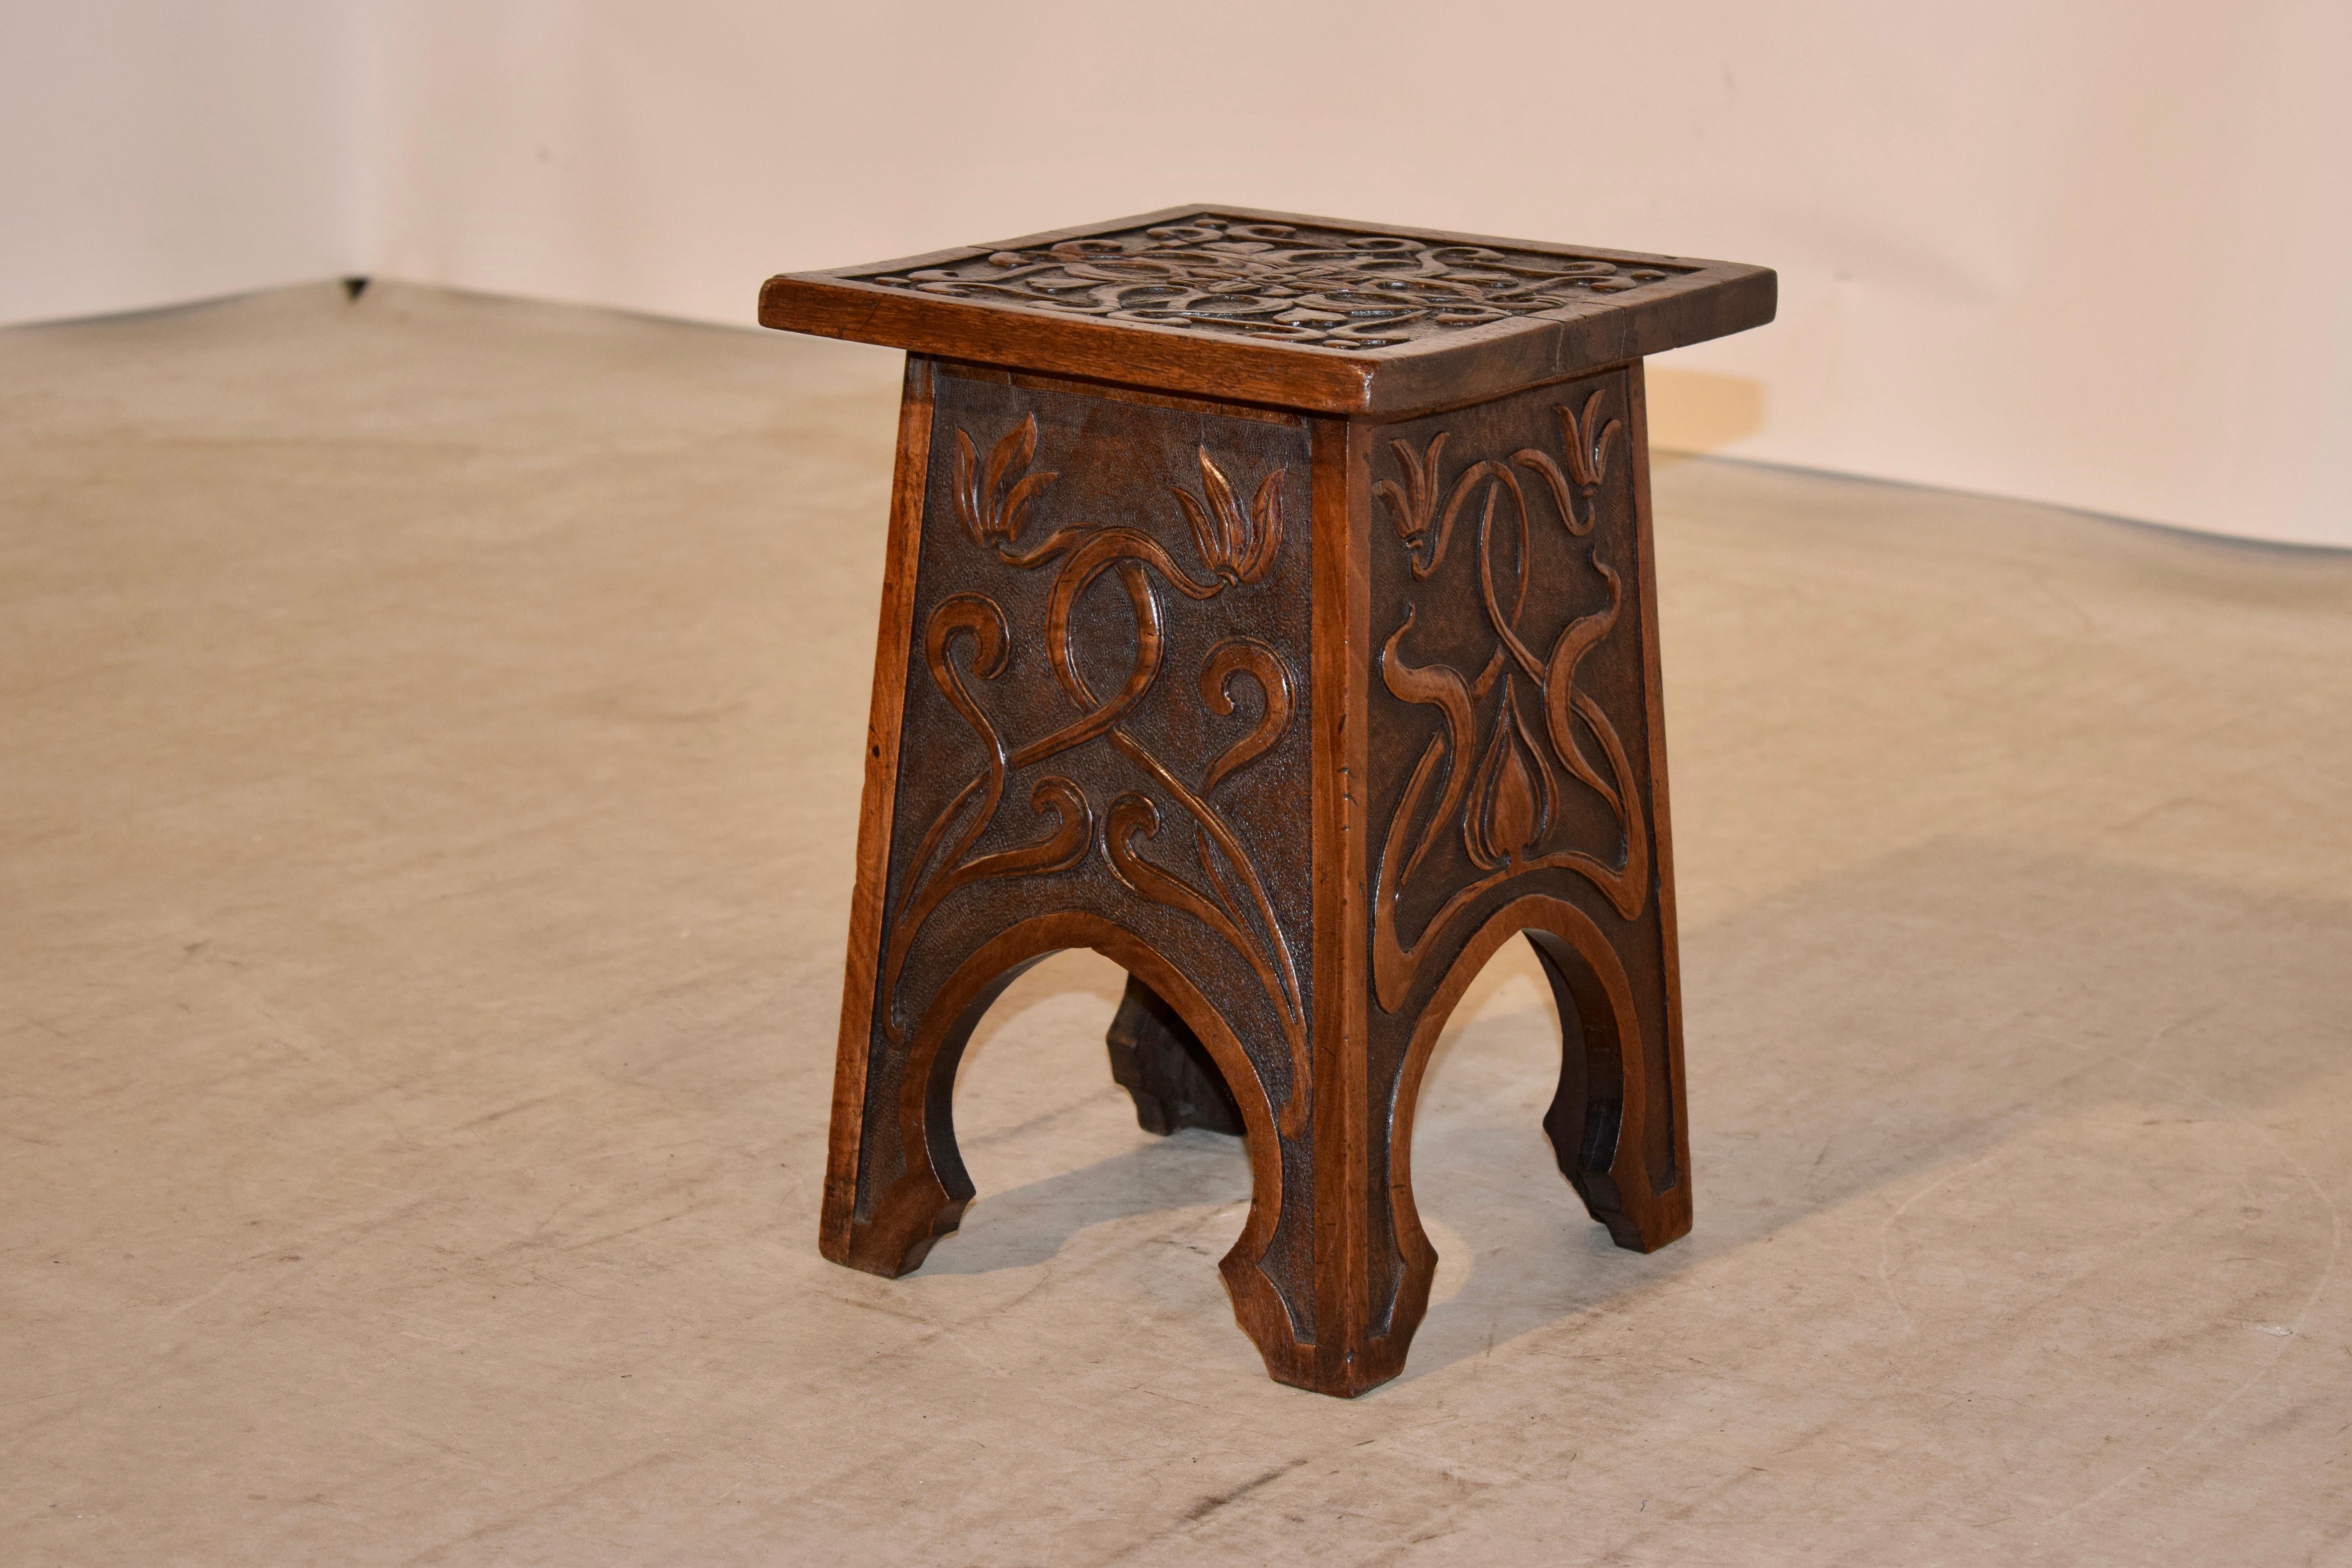 19th century oak stool from France with wonderfully hand carved Art Nouveau decoration. The top is banded and has gorgeous decoration in the central panel, following down to four decorated sides with banding and oval cutouts which form the feet.